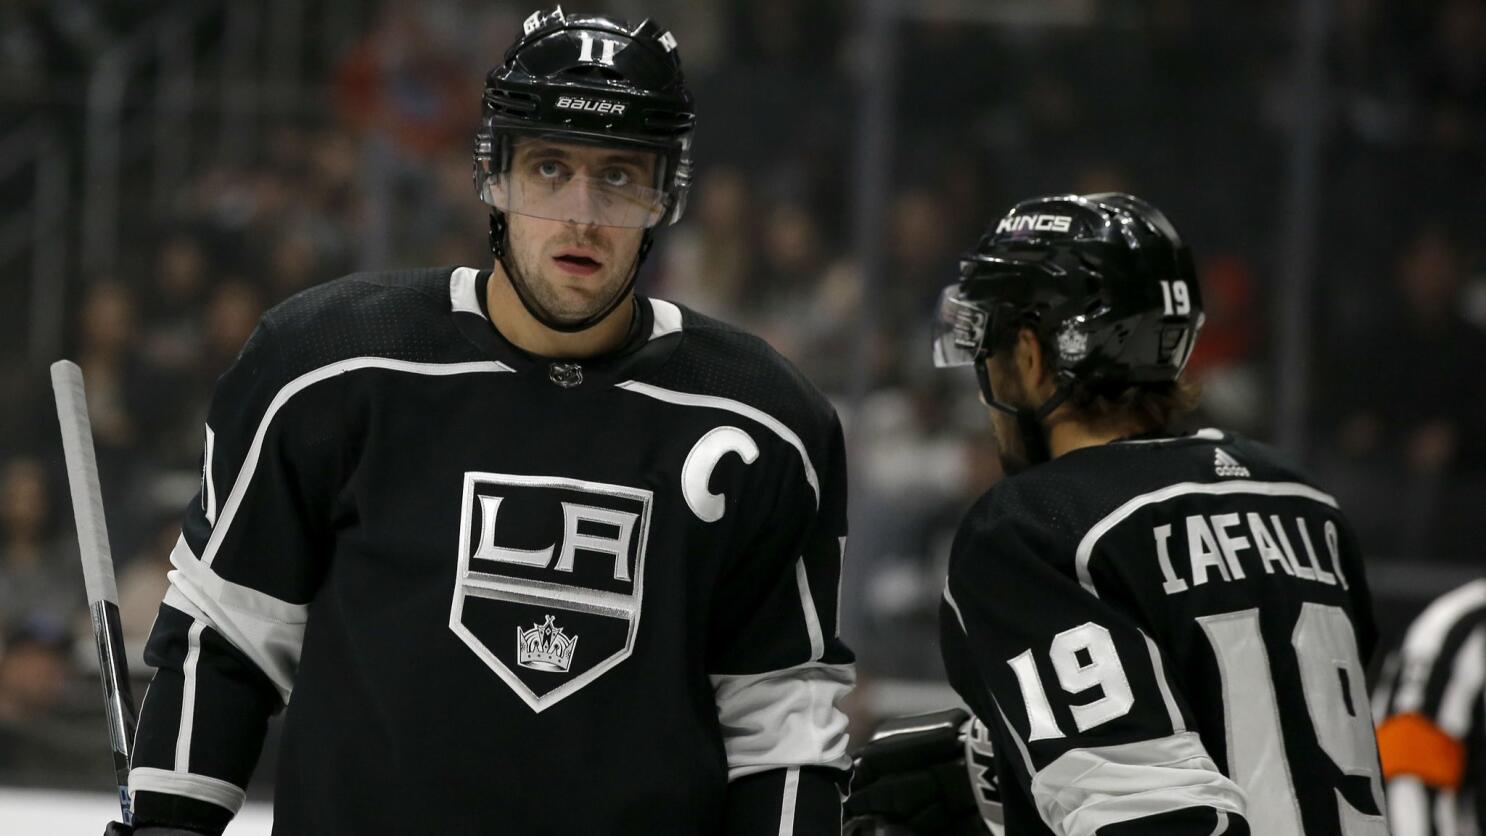 Kings' leaders struggle to come up with answers for team's